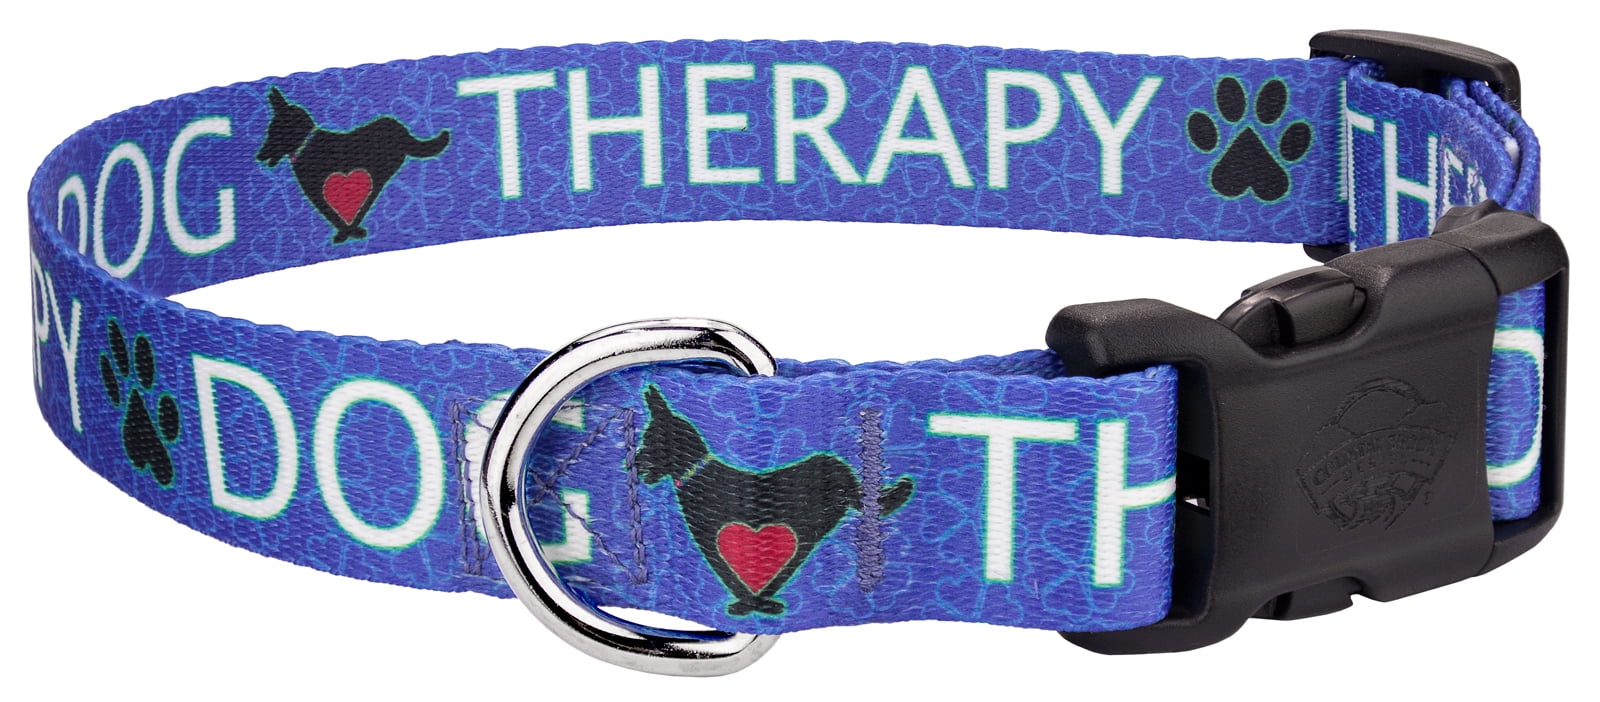 therapy dog collar